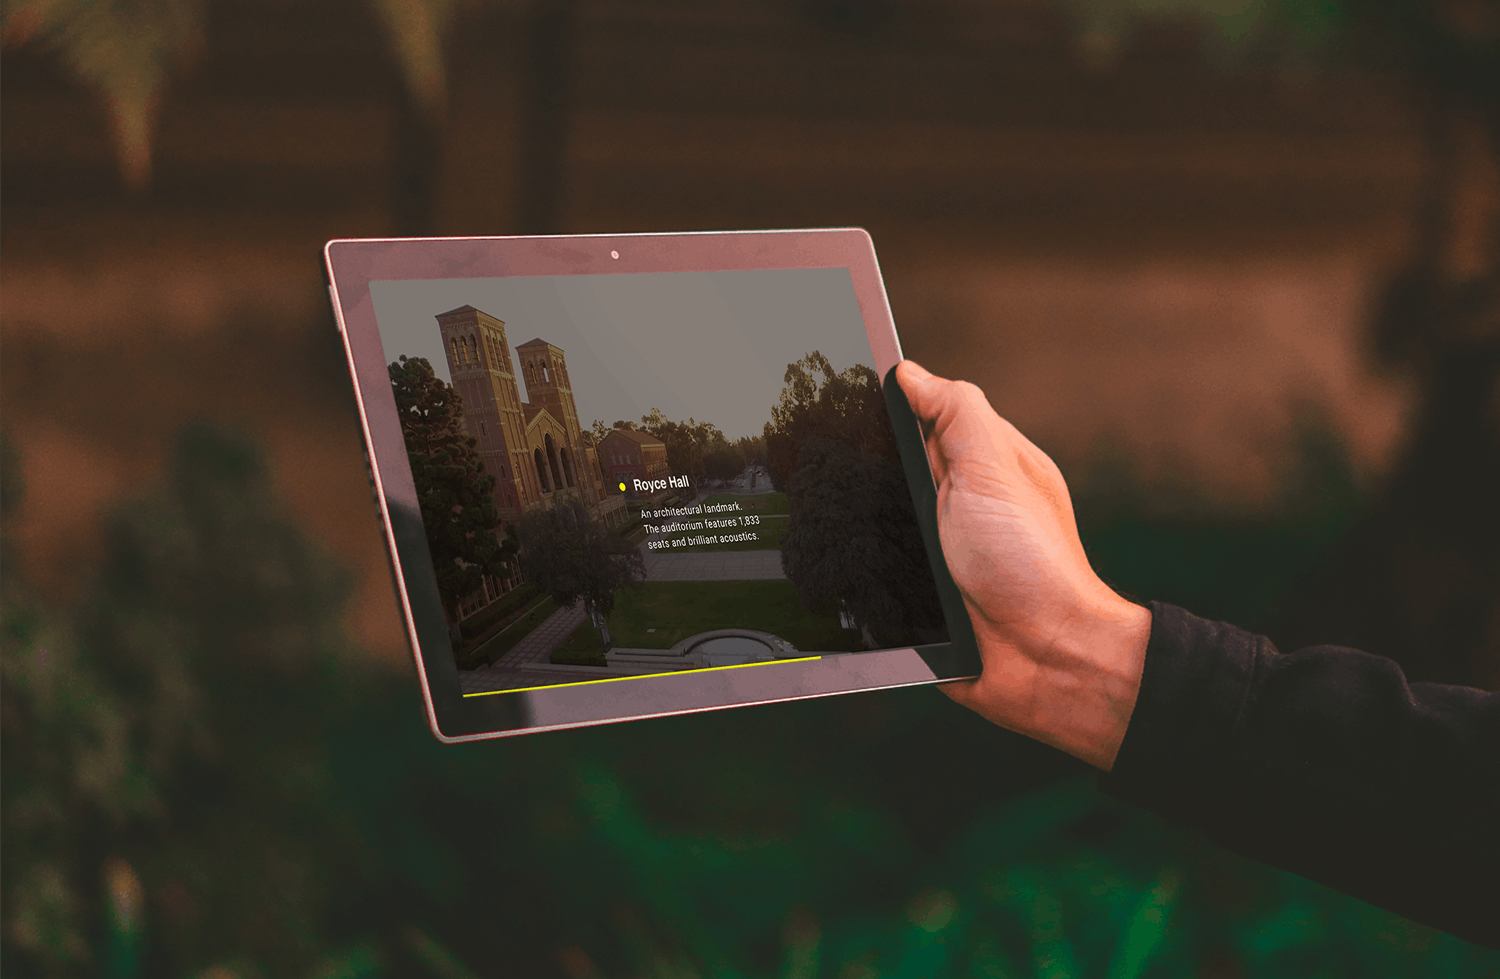 A hand holds an iPad with grass blurred out behind the iPad. The UCLA campus is shown on the iPad.